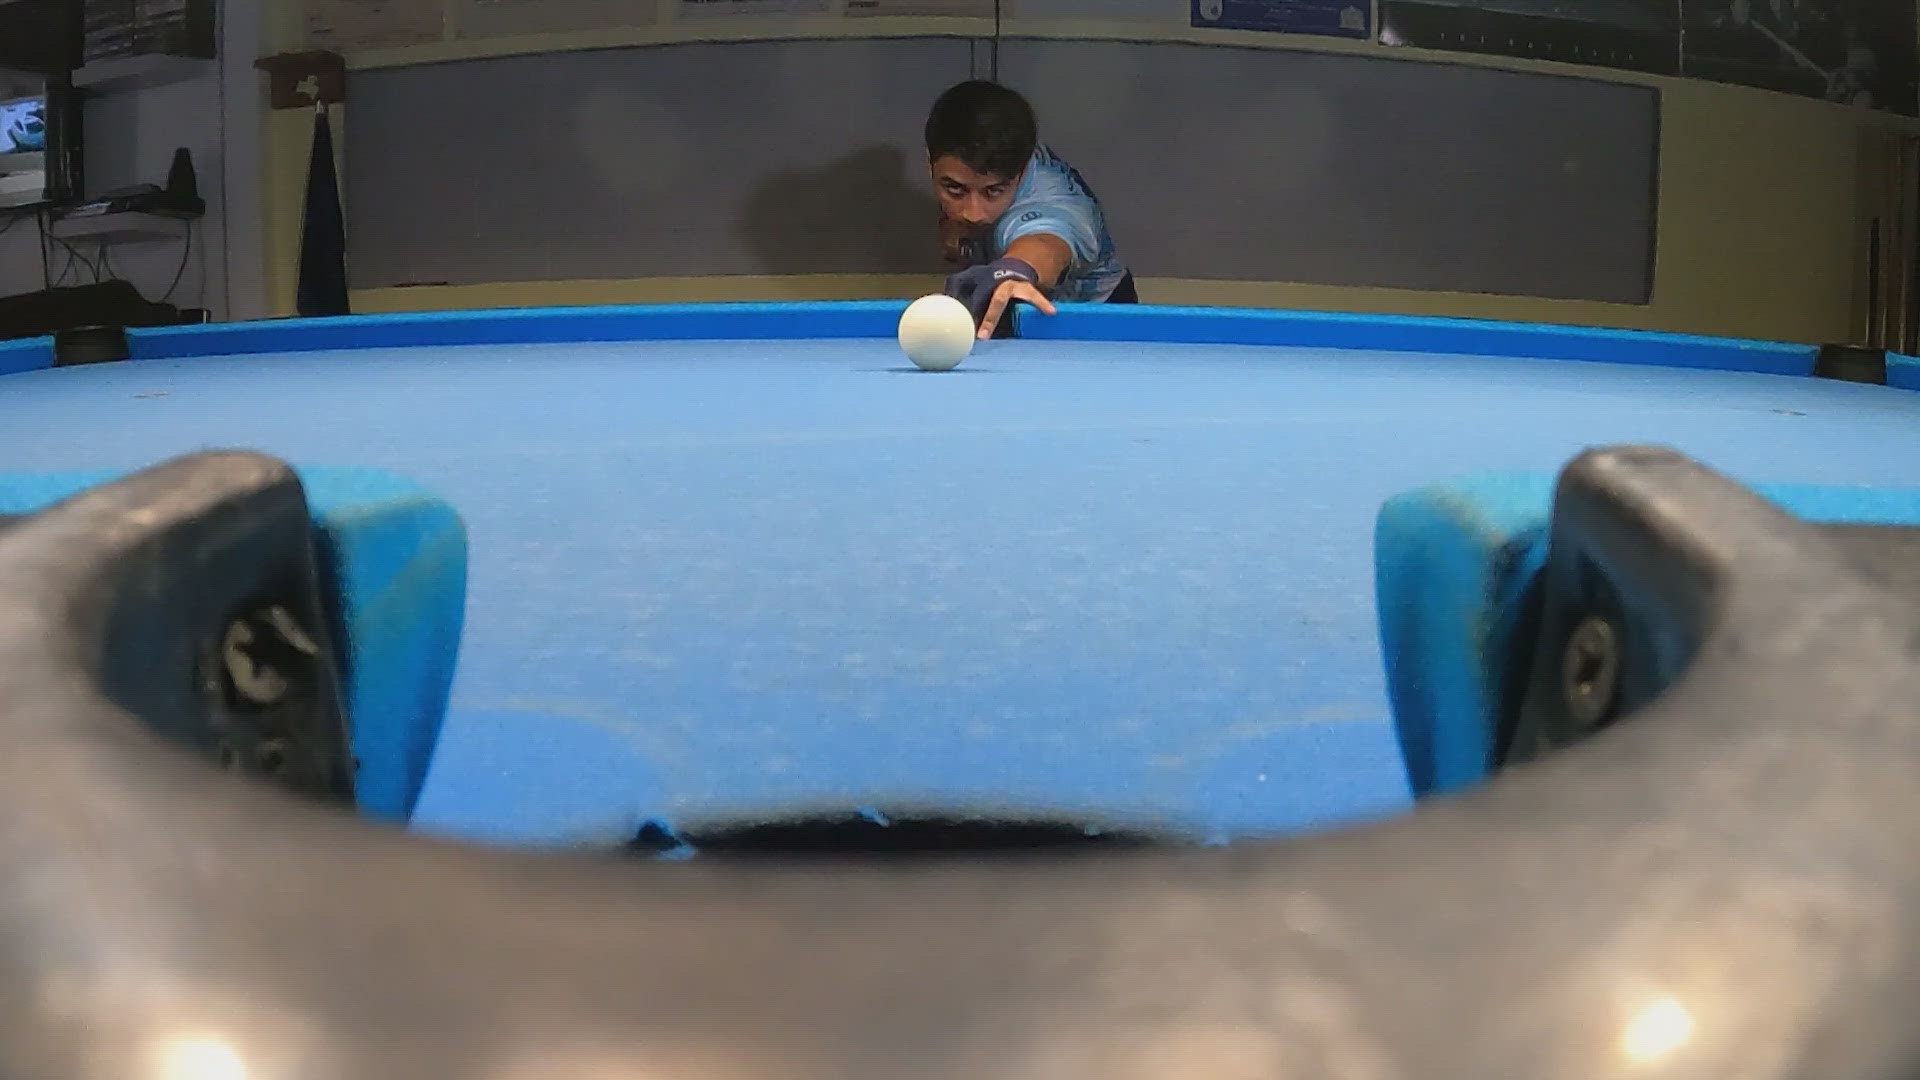 The top-ranked 17-year-old in professional pool is from New Braunfels kens5